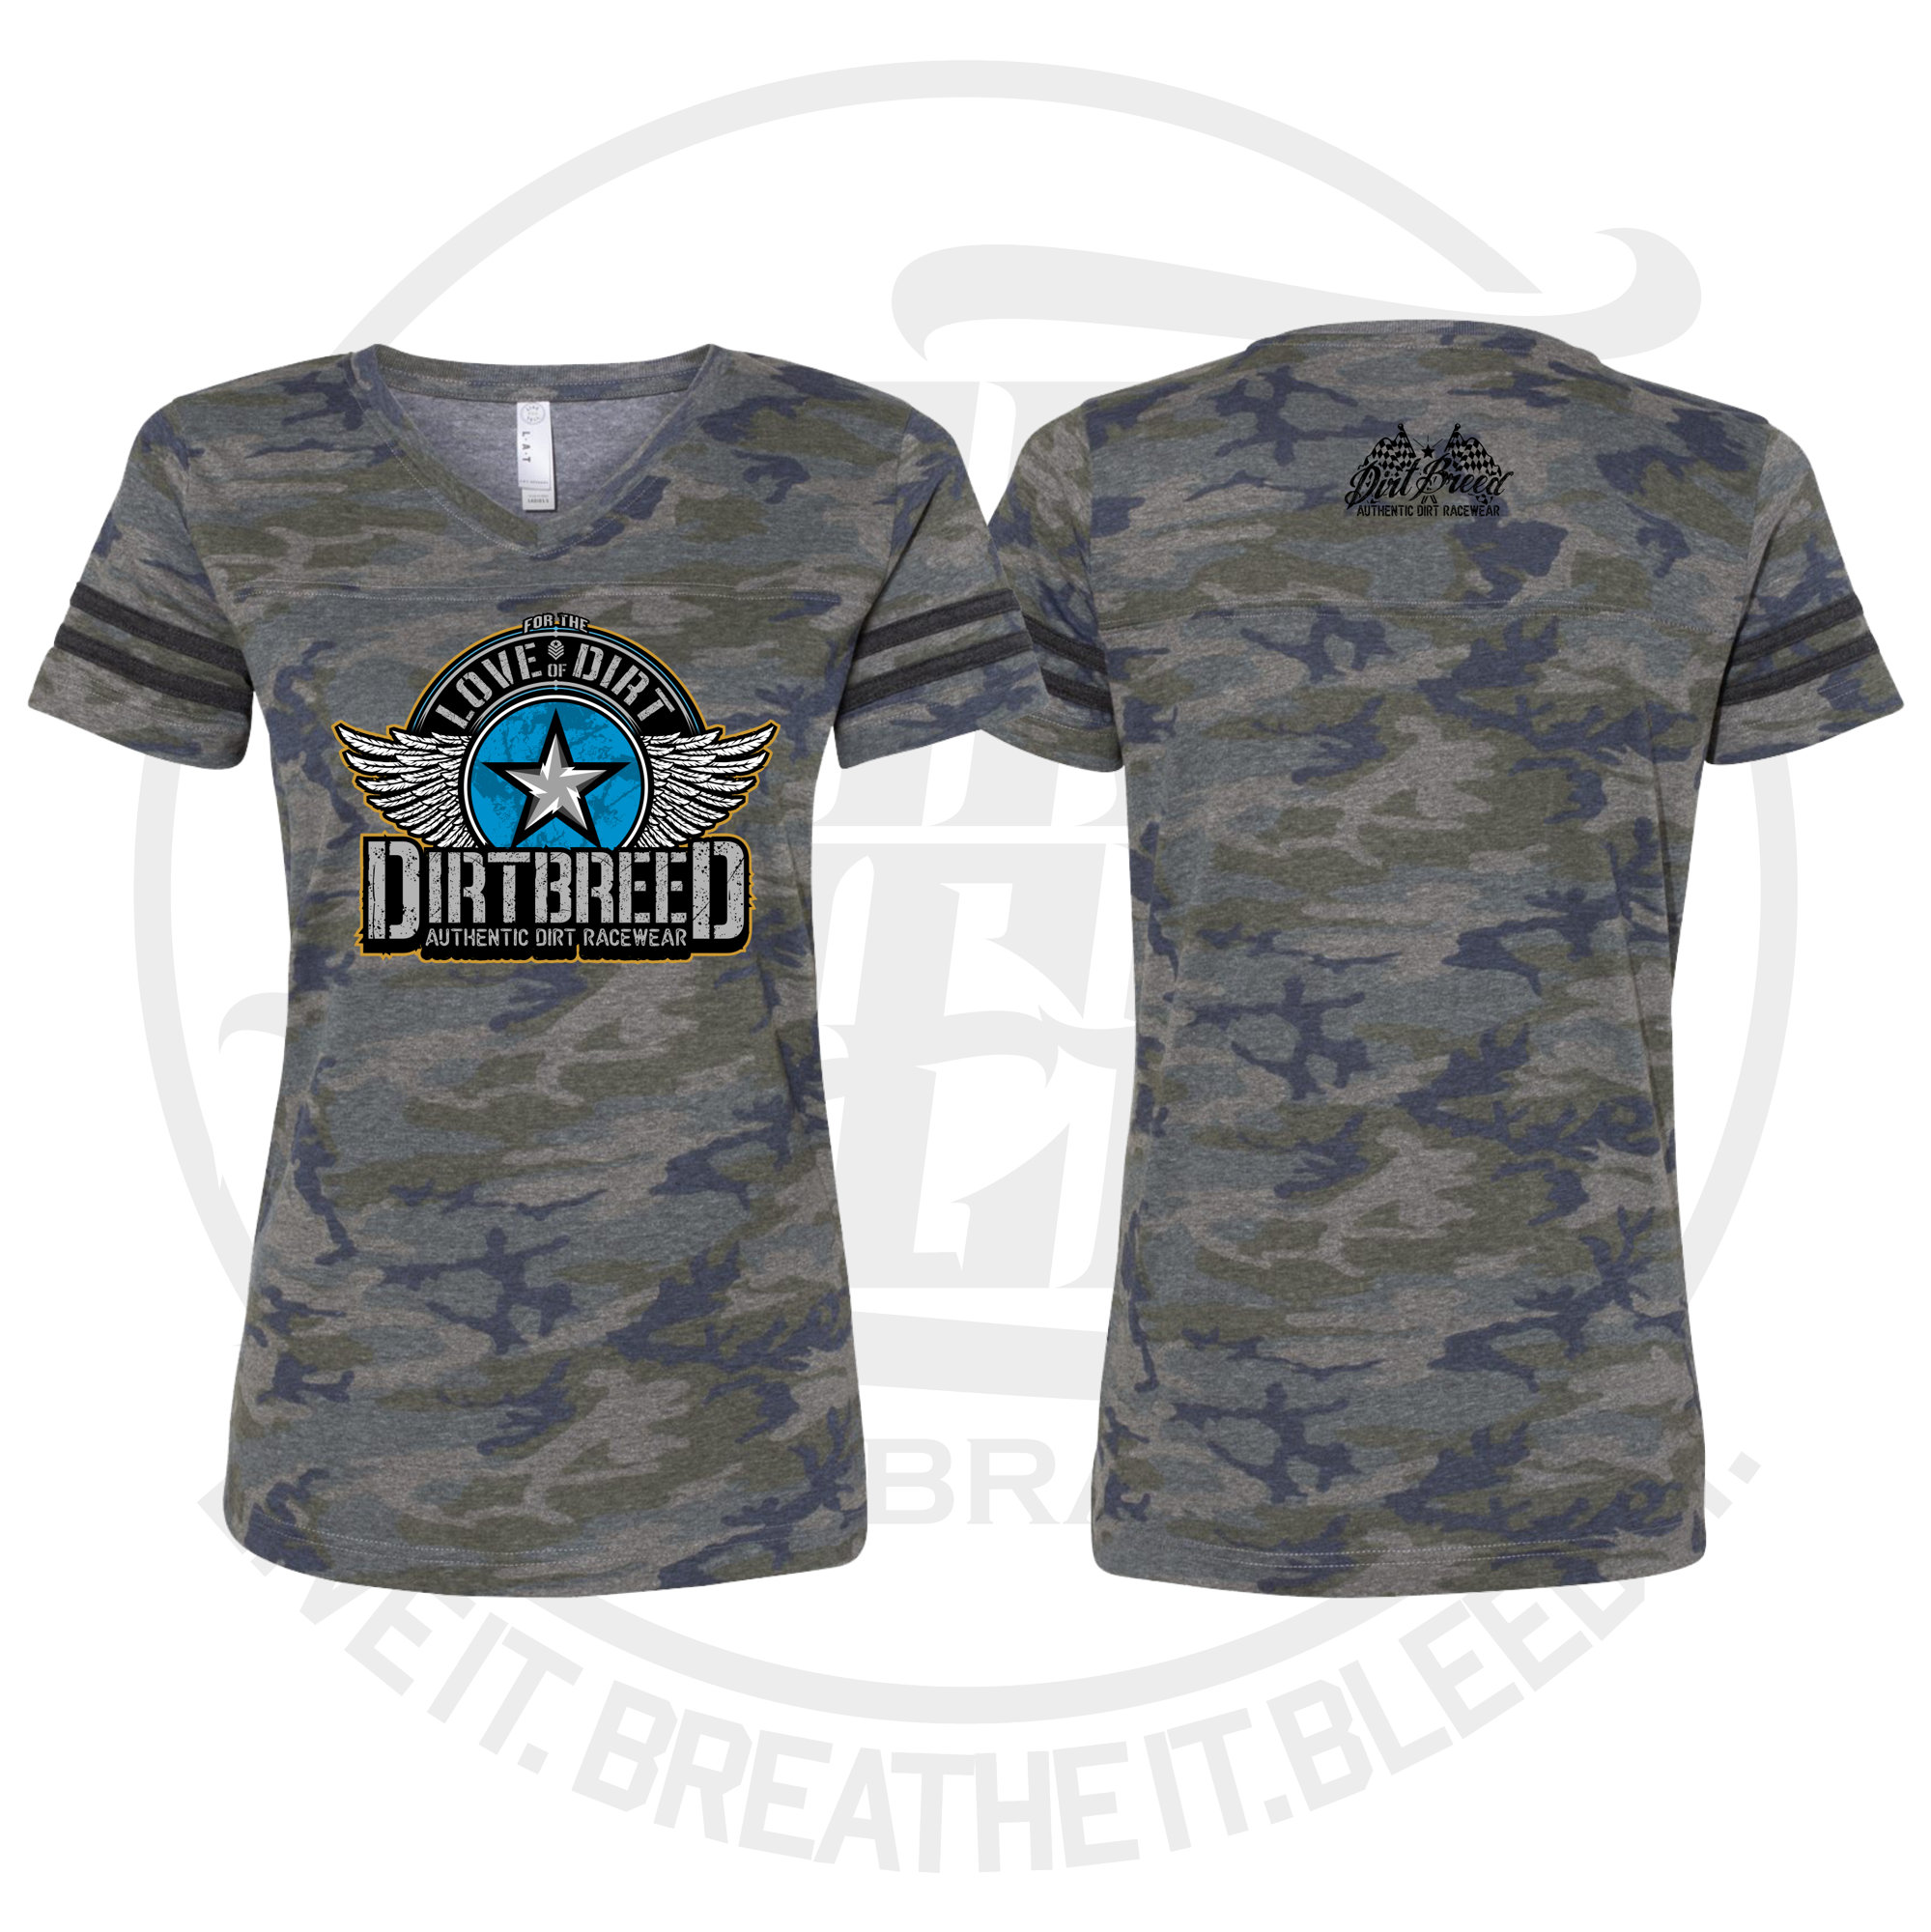 DirtKid Play in the Dirt T-Shirt - Dirt Breed